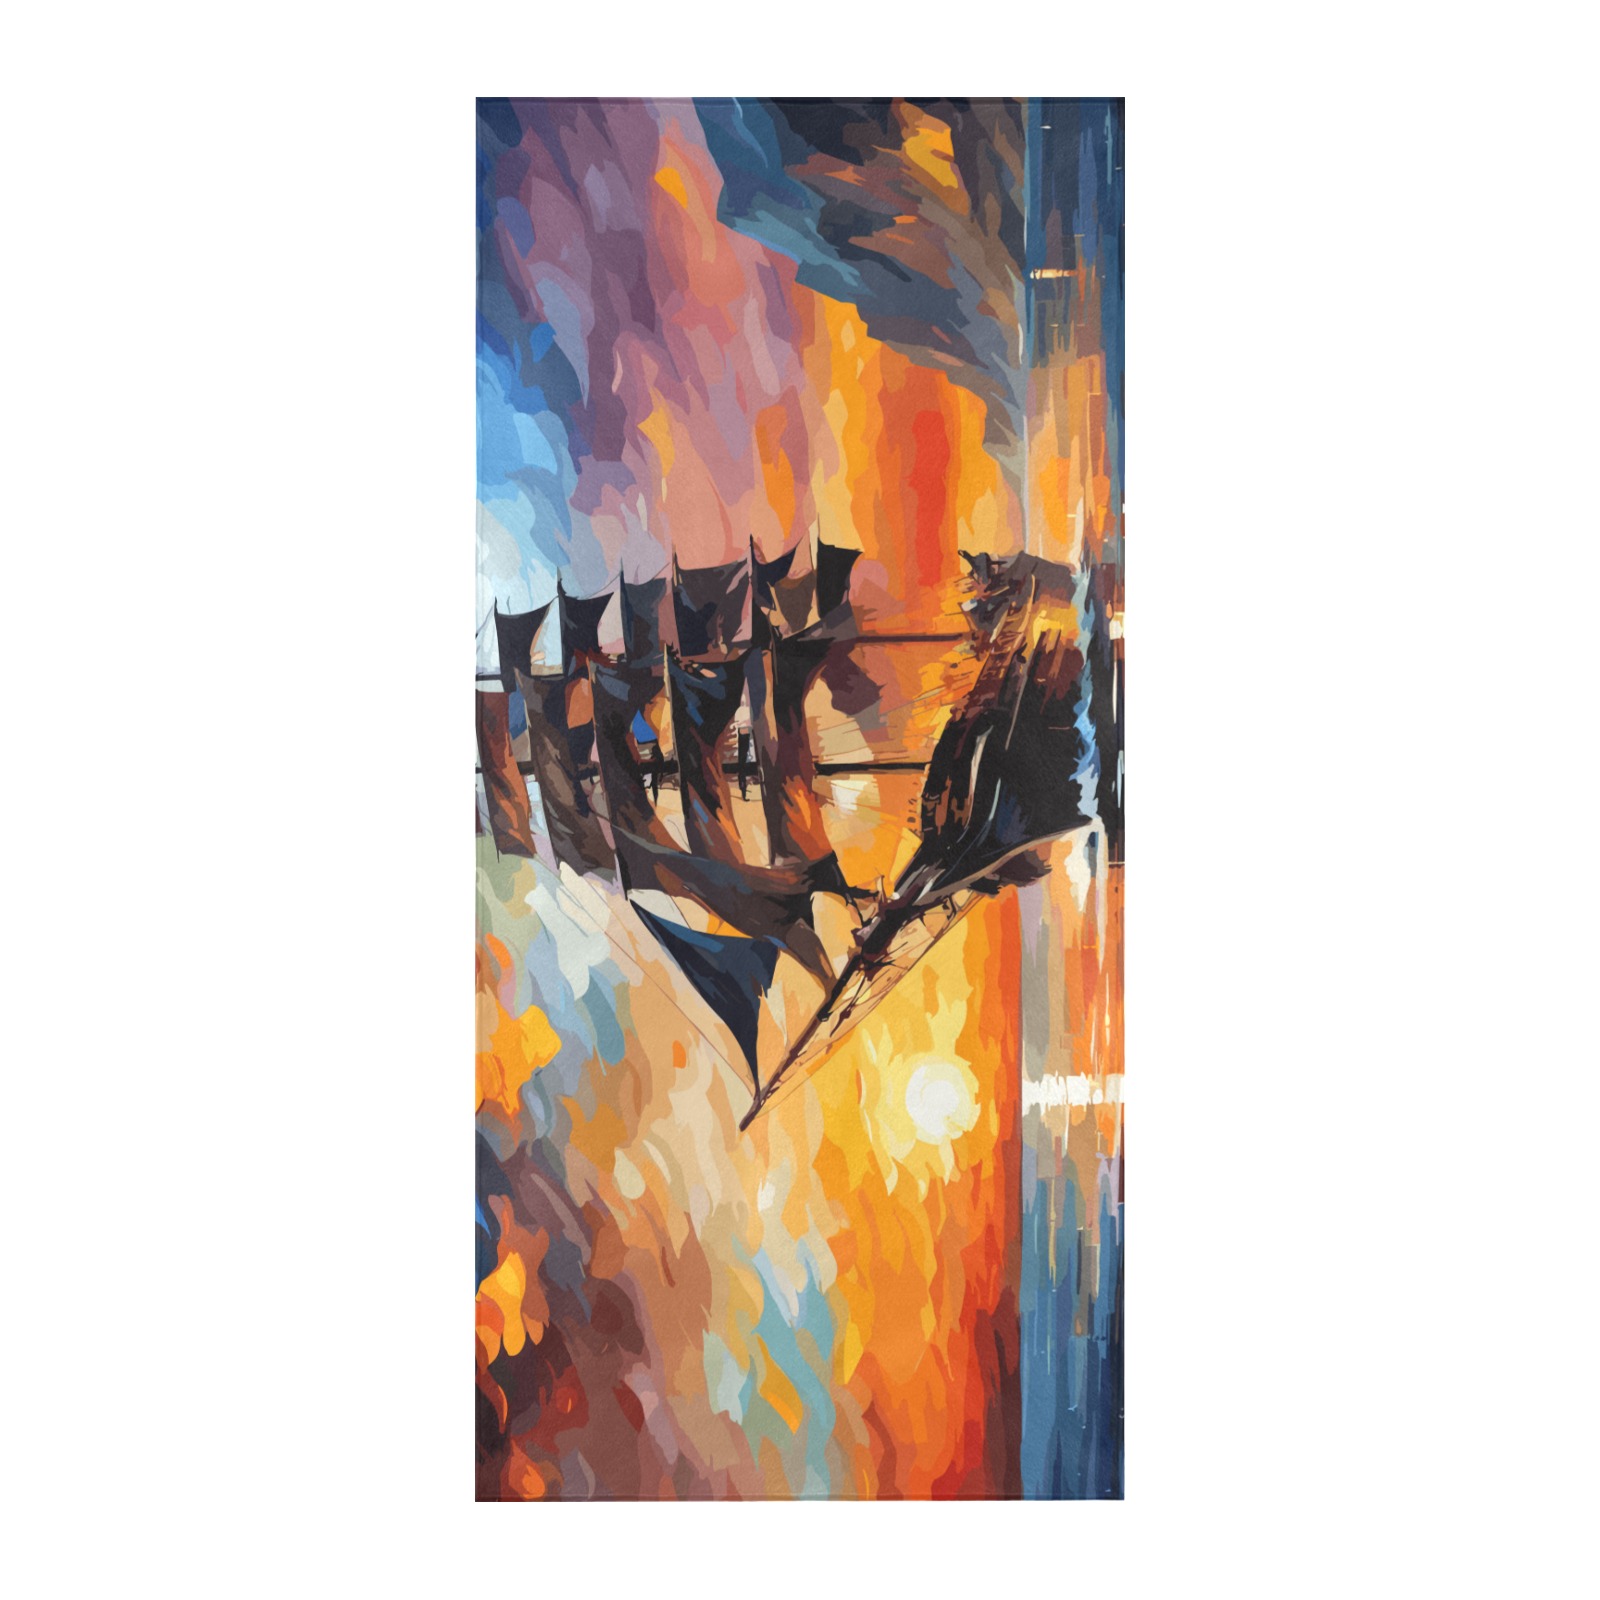 Cool pirate ship by the island at dramatic sunset. Beach Towel 32"x 71"